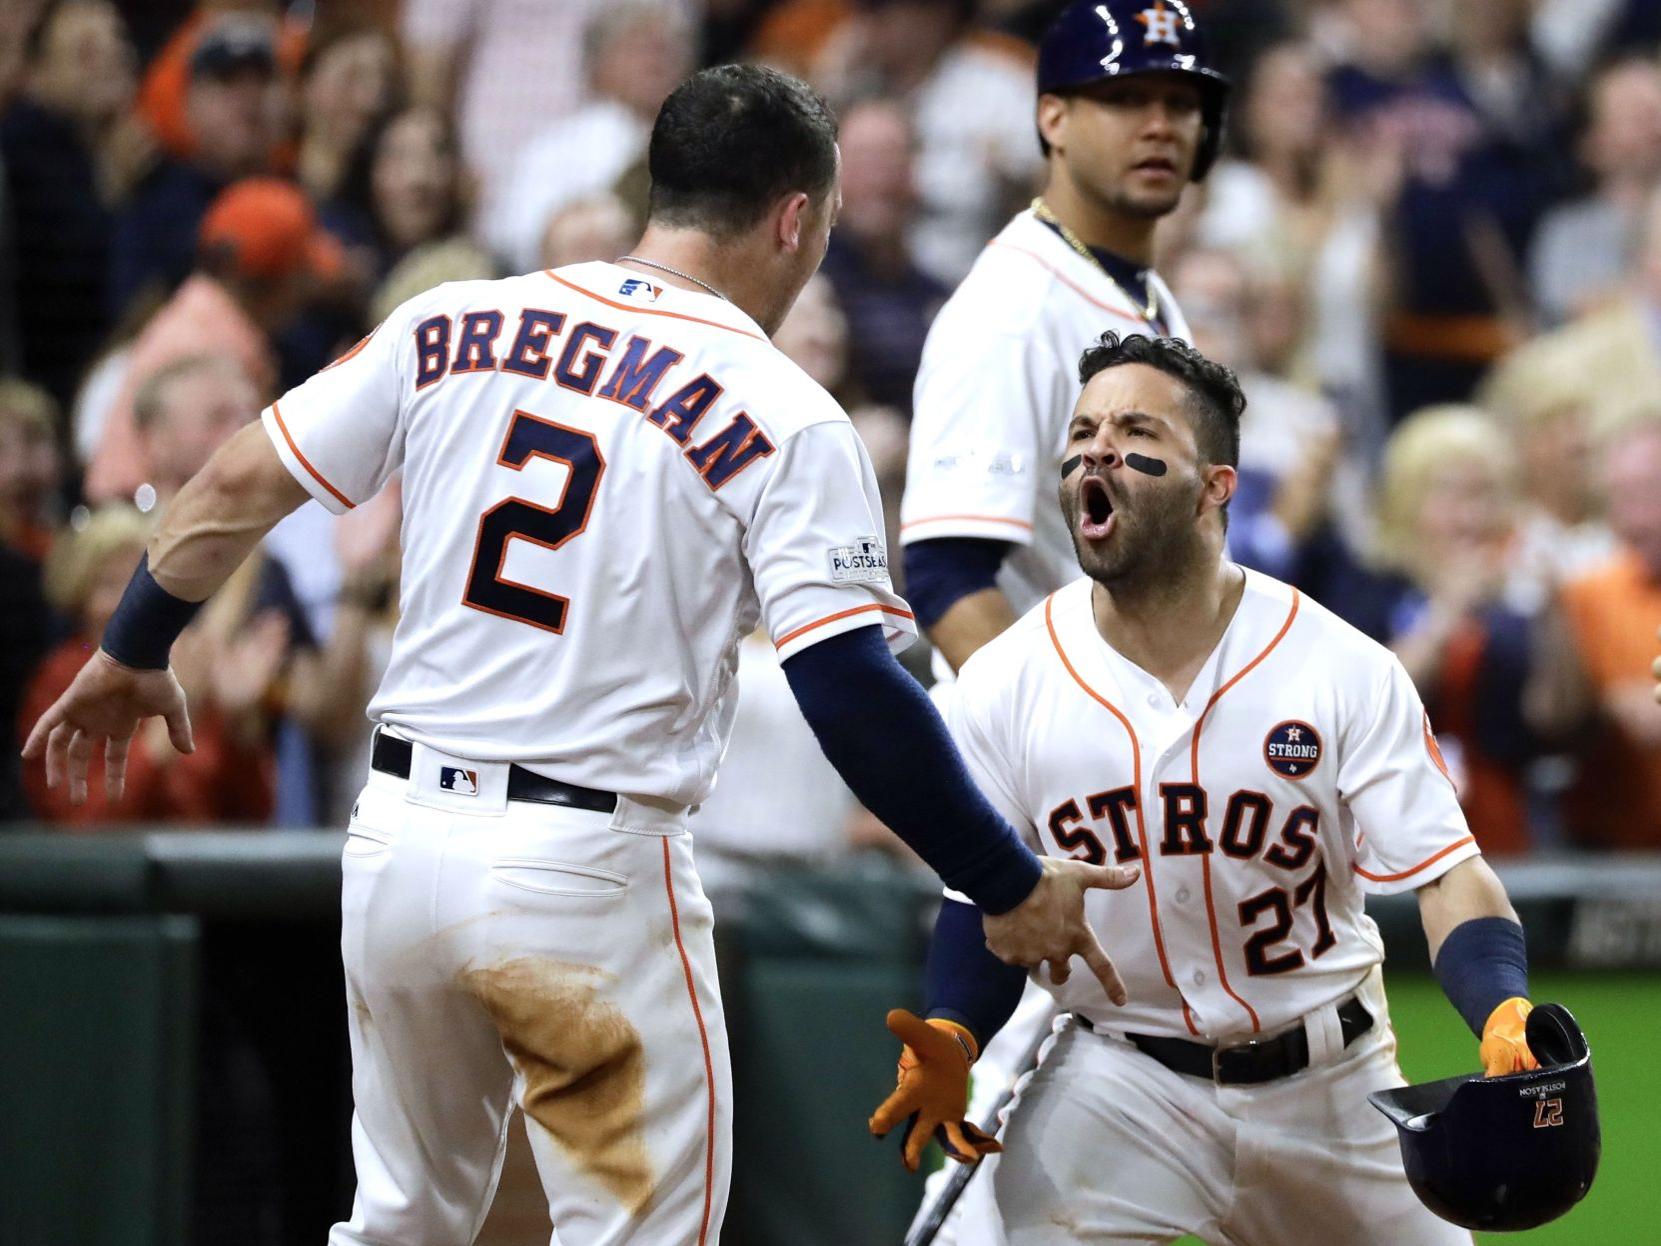 Sorry Yankees, the Astros are ready to win the World Series.